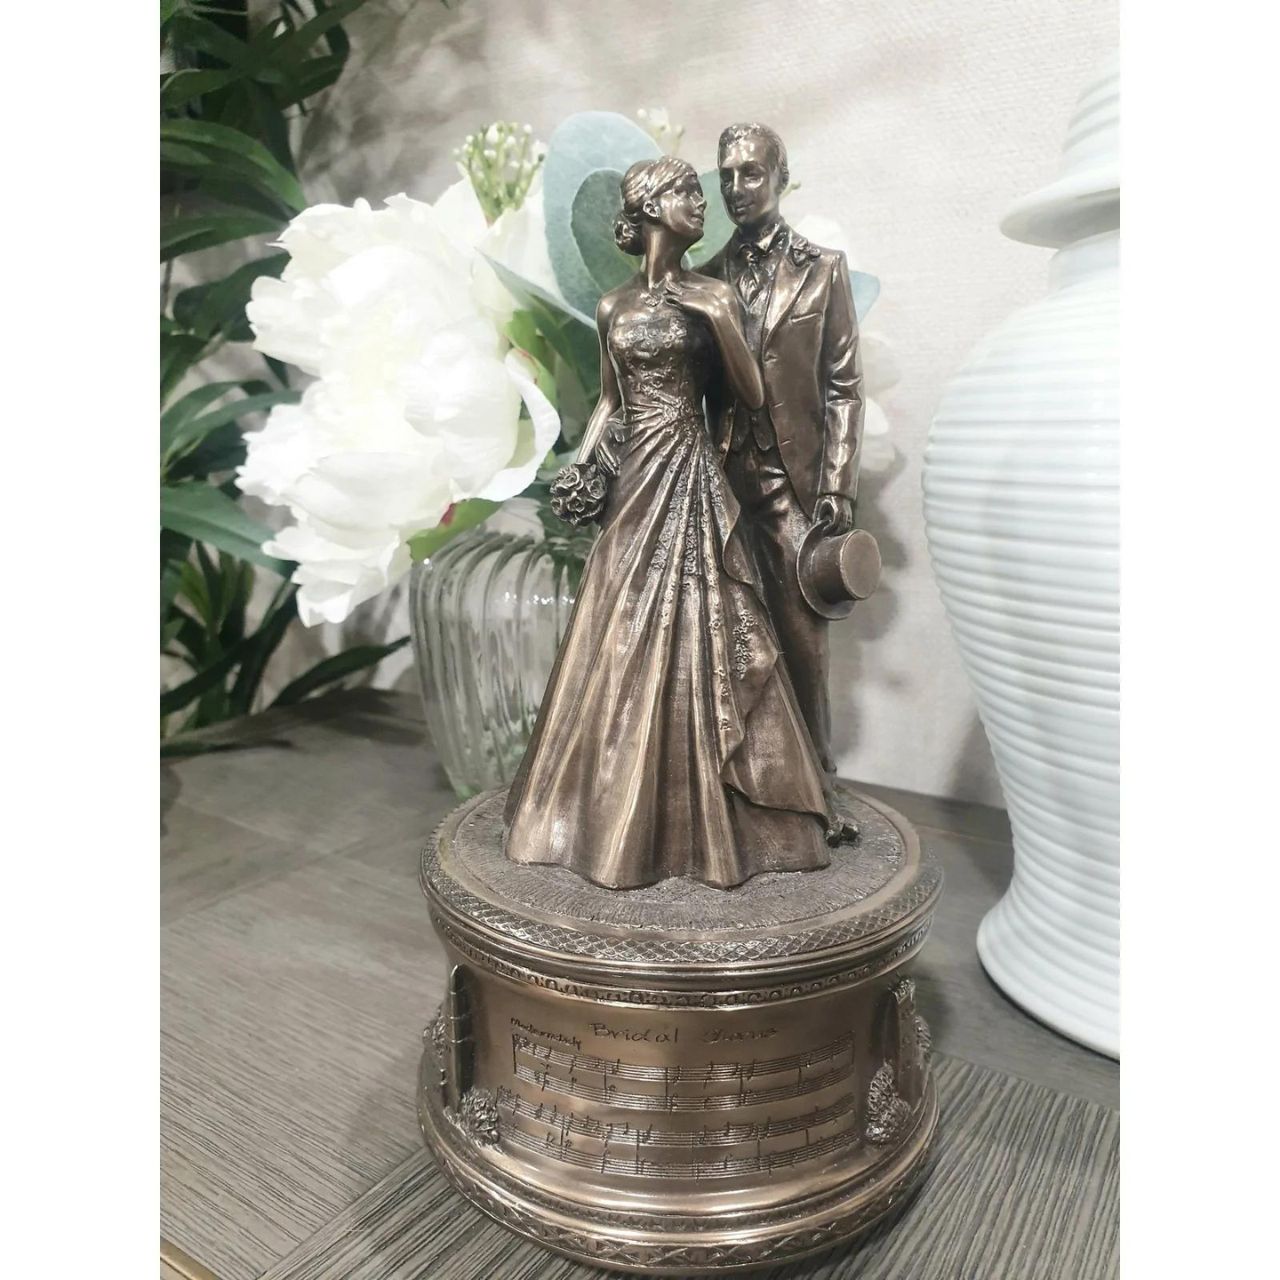 Just Married Music Box by Genesis  Genesis Fine Arts has evolved into a much loved and world famous Irish brand to produce a striking range of handcrafted cold cast bronze sculptures.  - Genesis Ireland Wedding Gift.